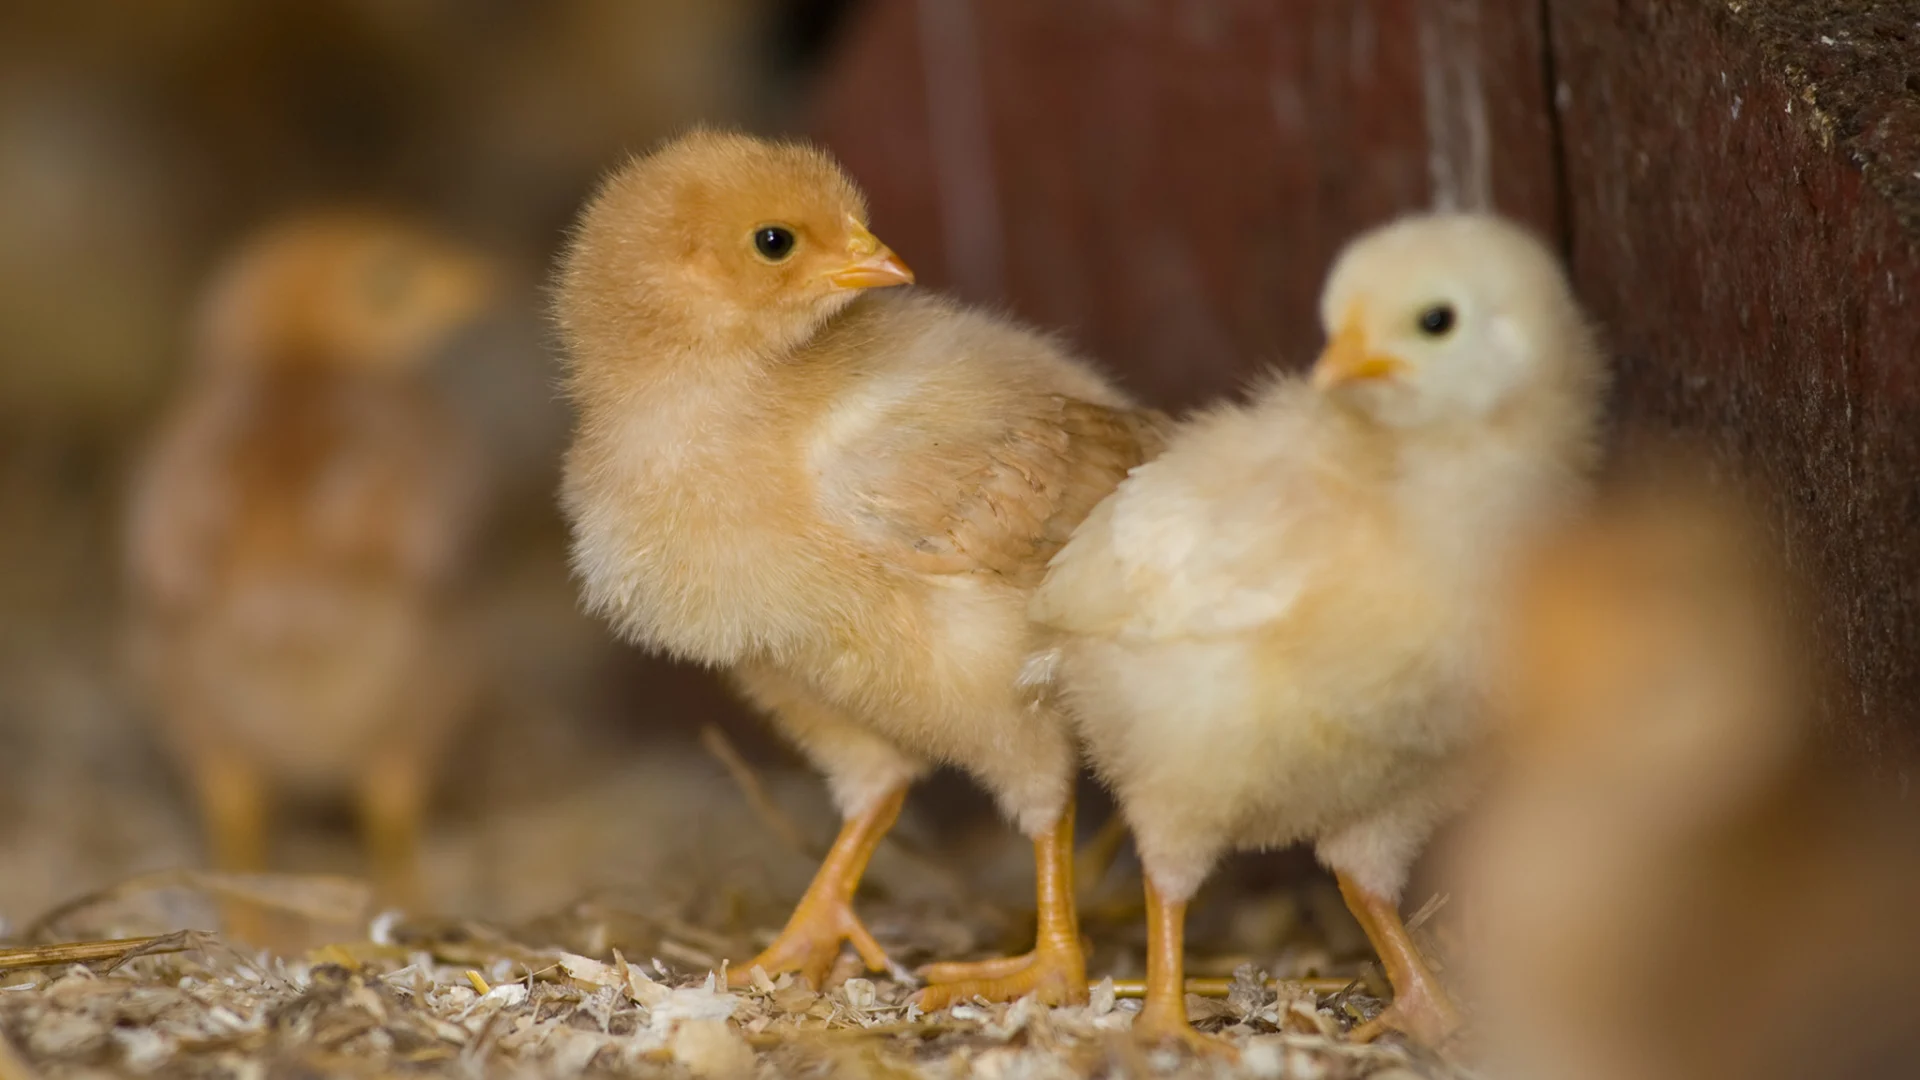 Two small chicks standing in straw.